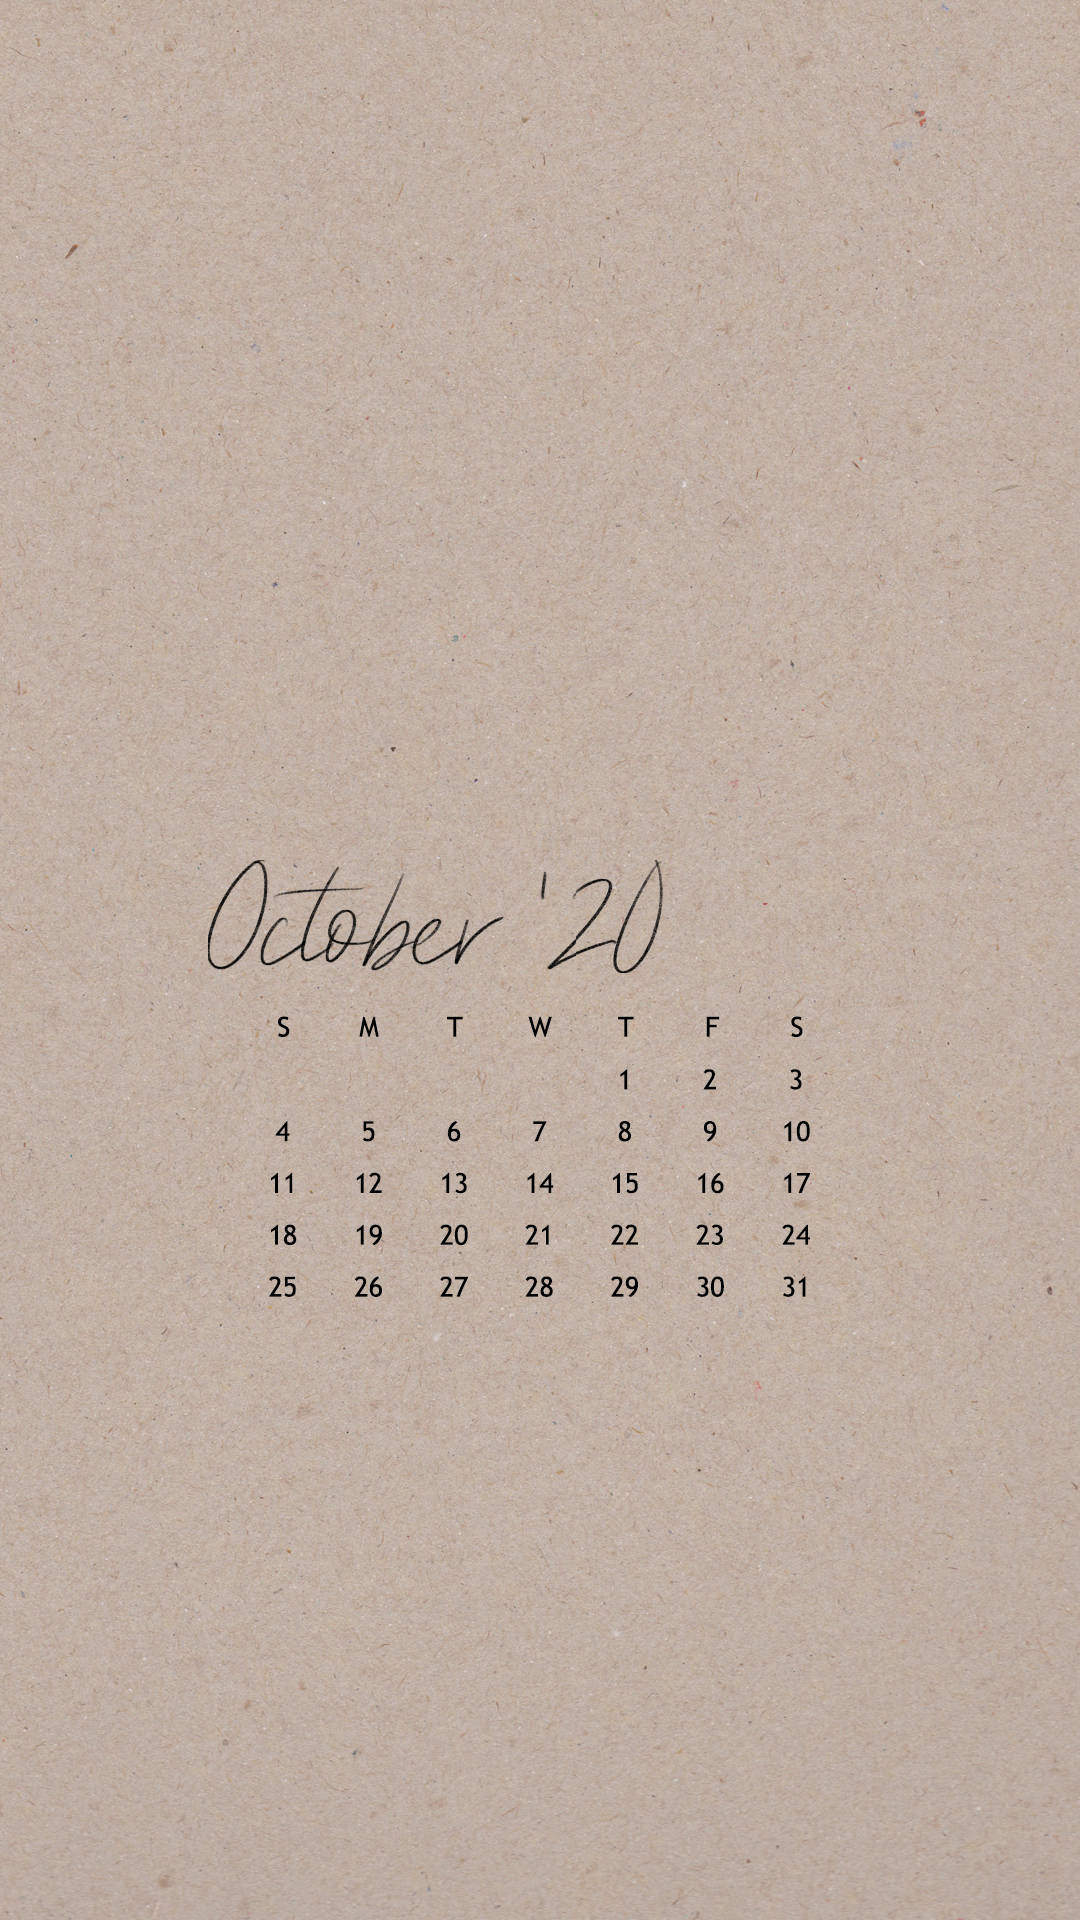 A Calendar With The Word October 20 Written On It Wallpaper